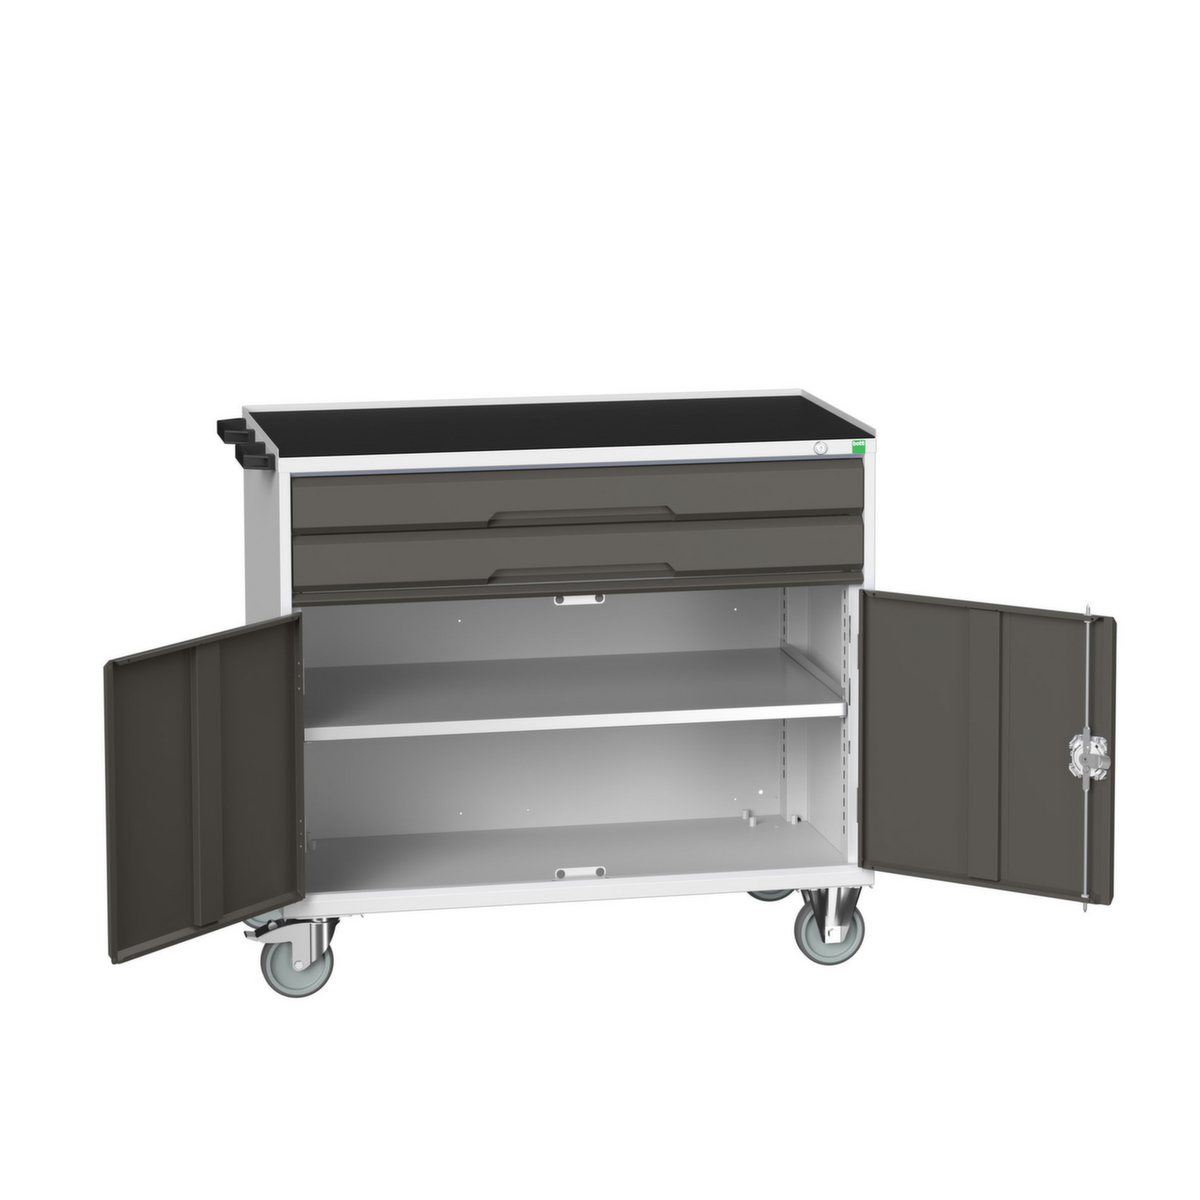 bott Chariot à outils verso, 2 tiroirs, 1 armoire, RAL7035 gris clair/RAL7016 gris anthracite  ZOOM